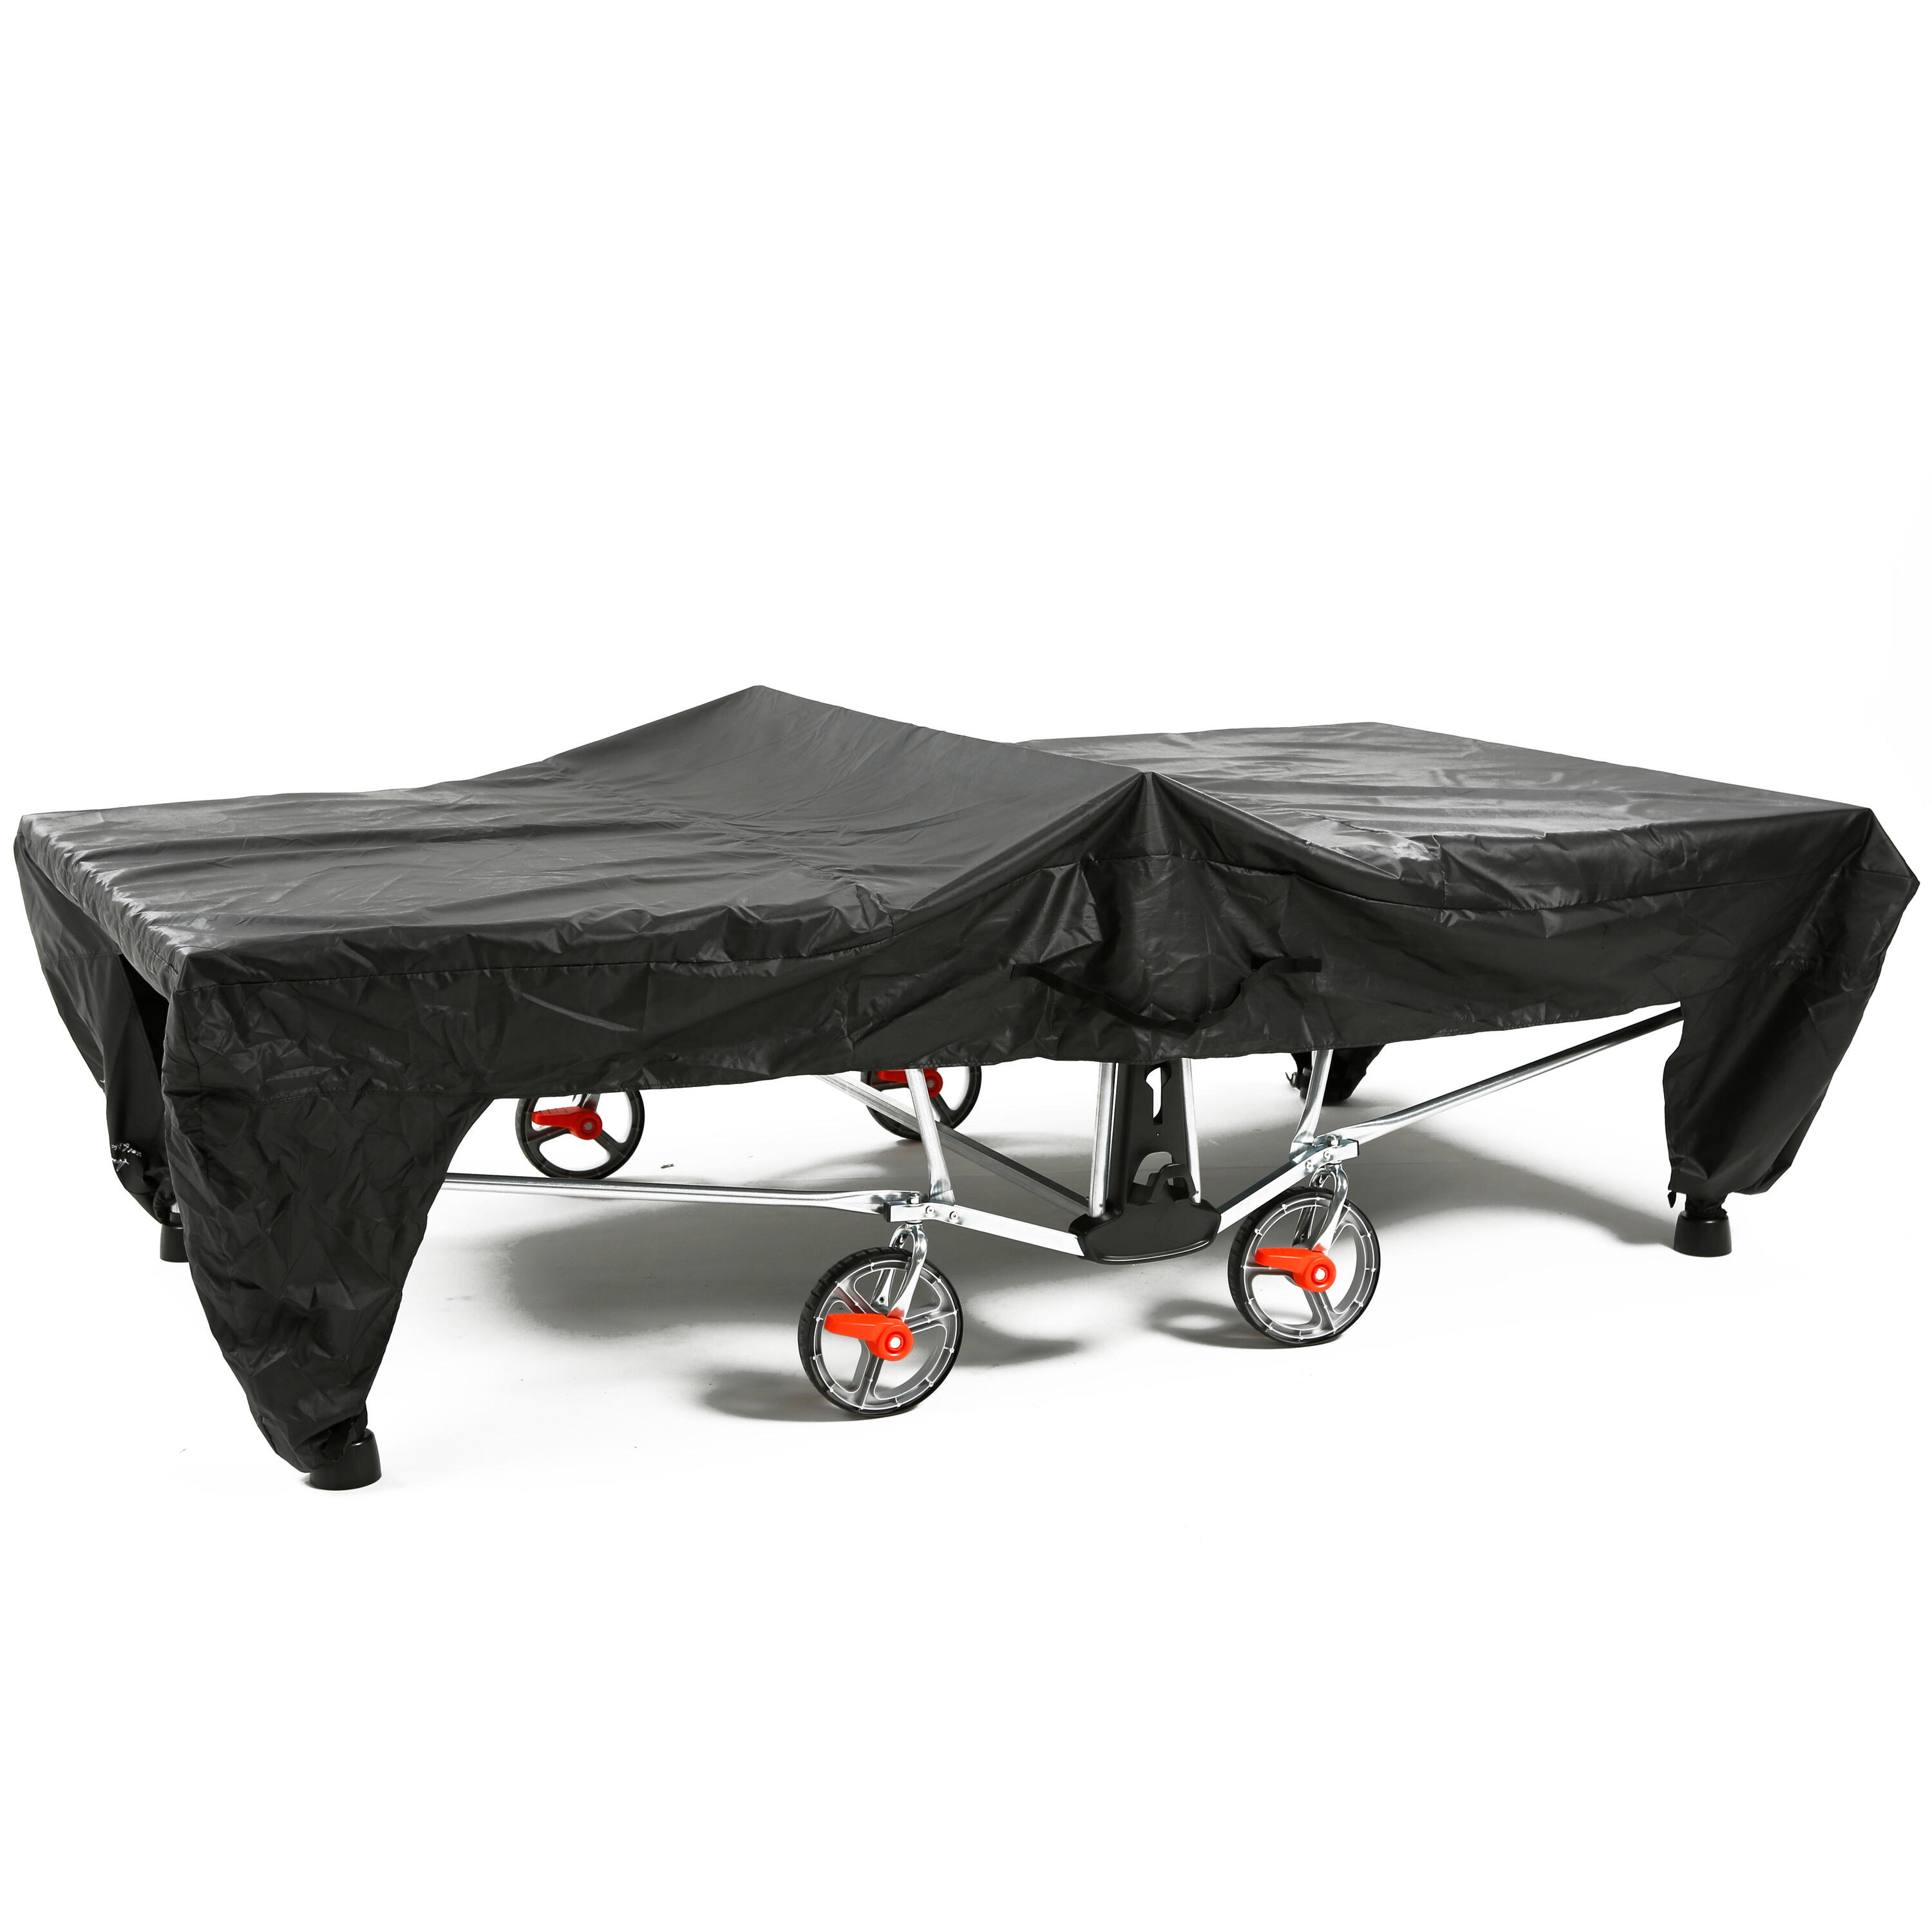 Table Tennis Open Table Cover - Black 1/10